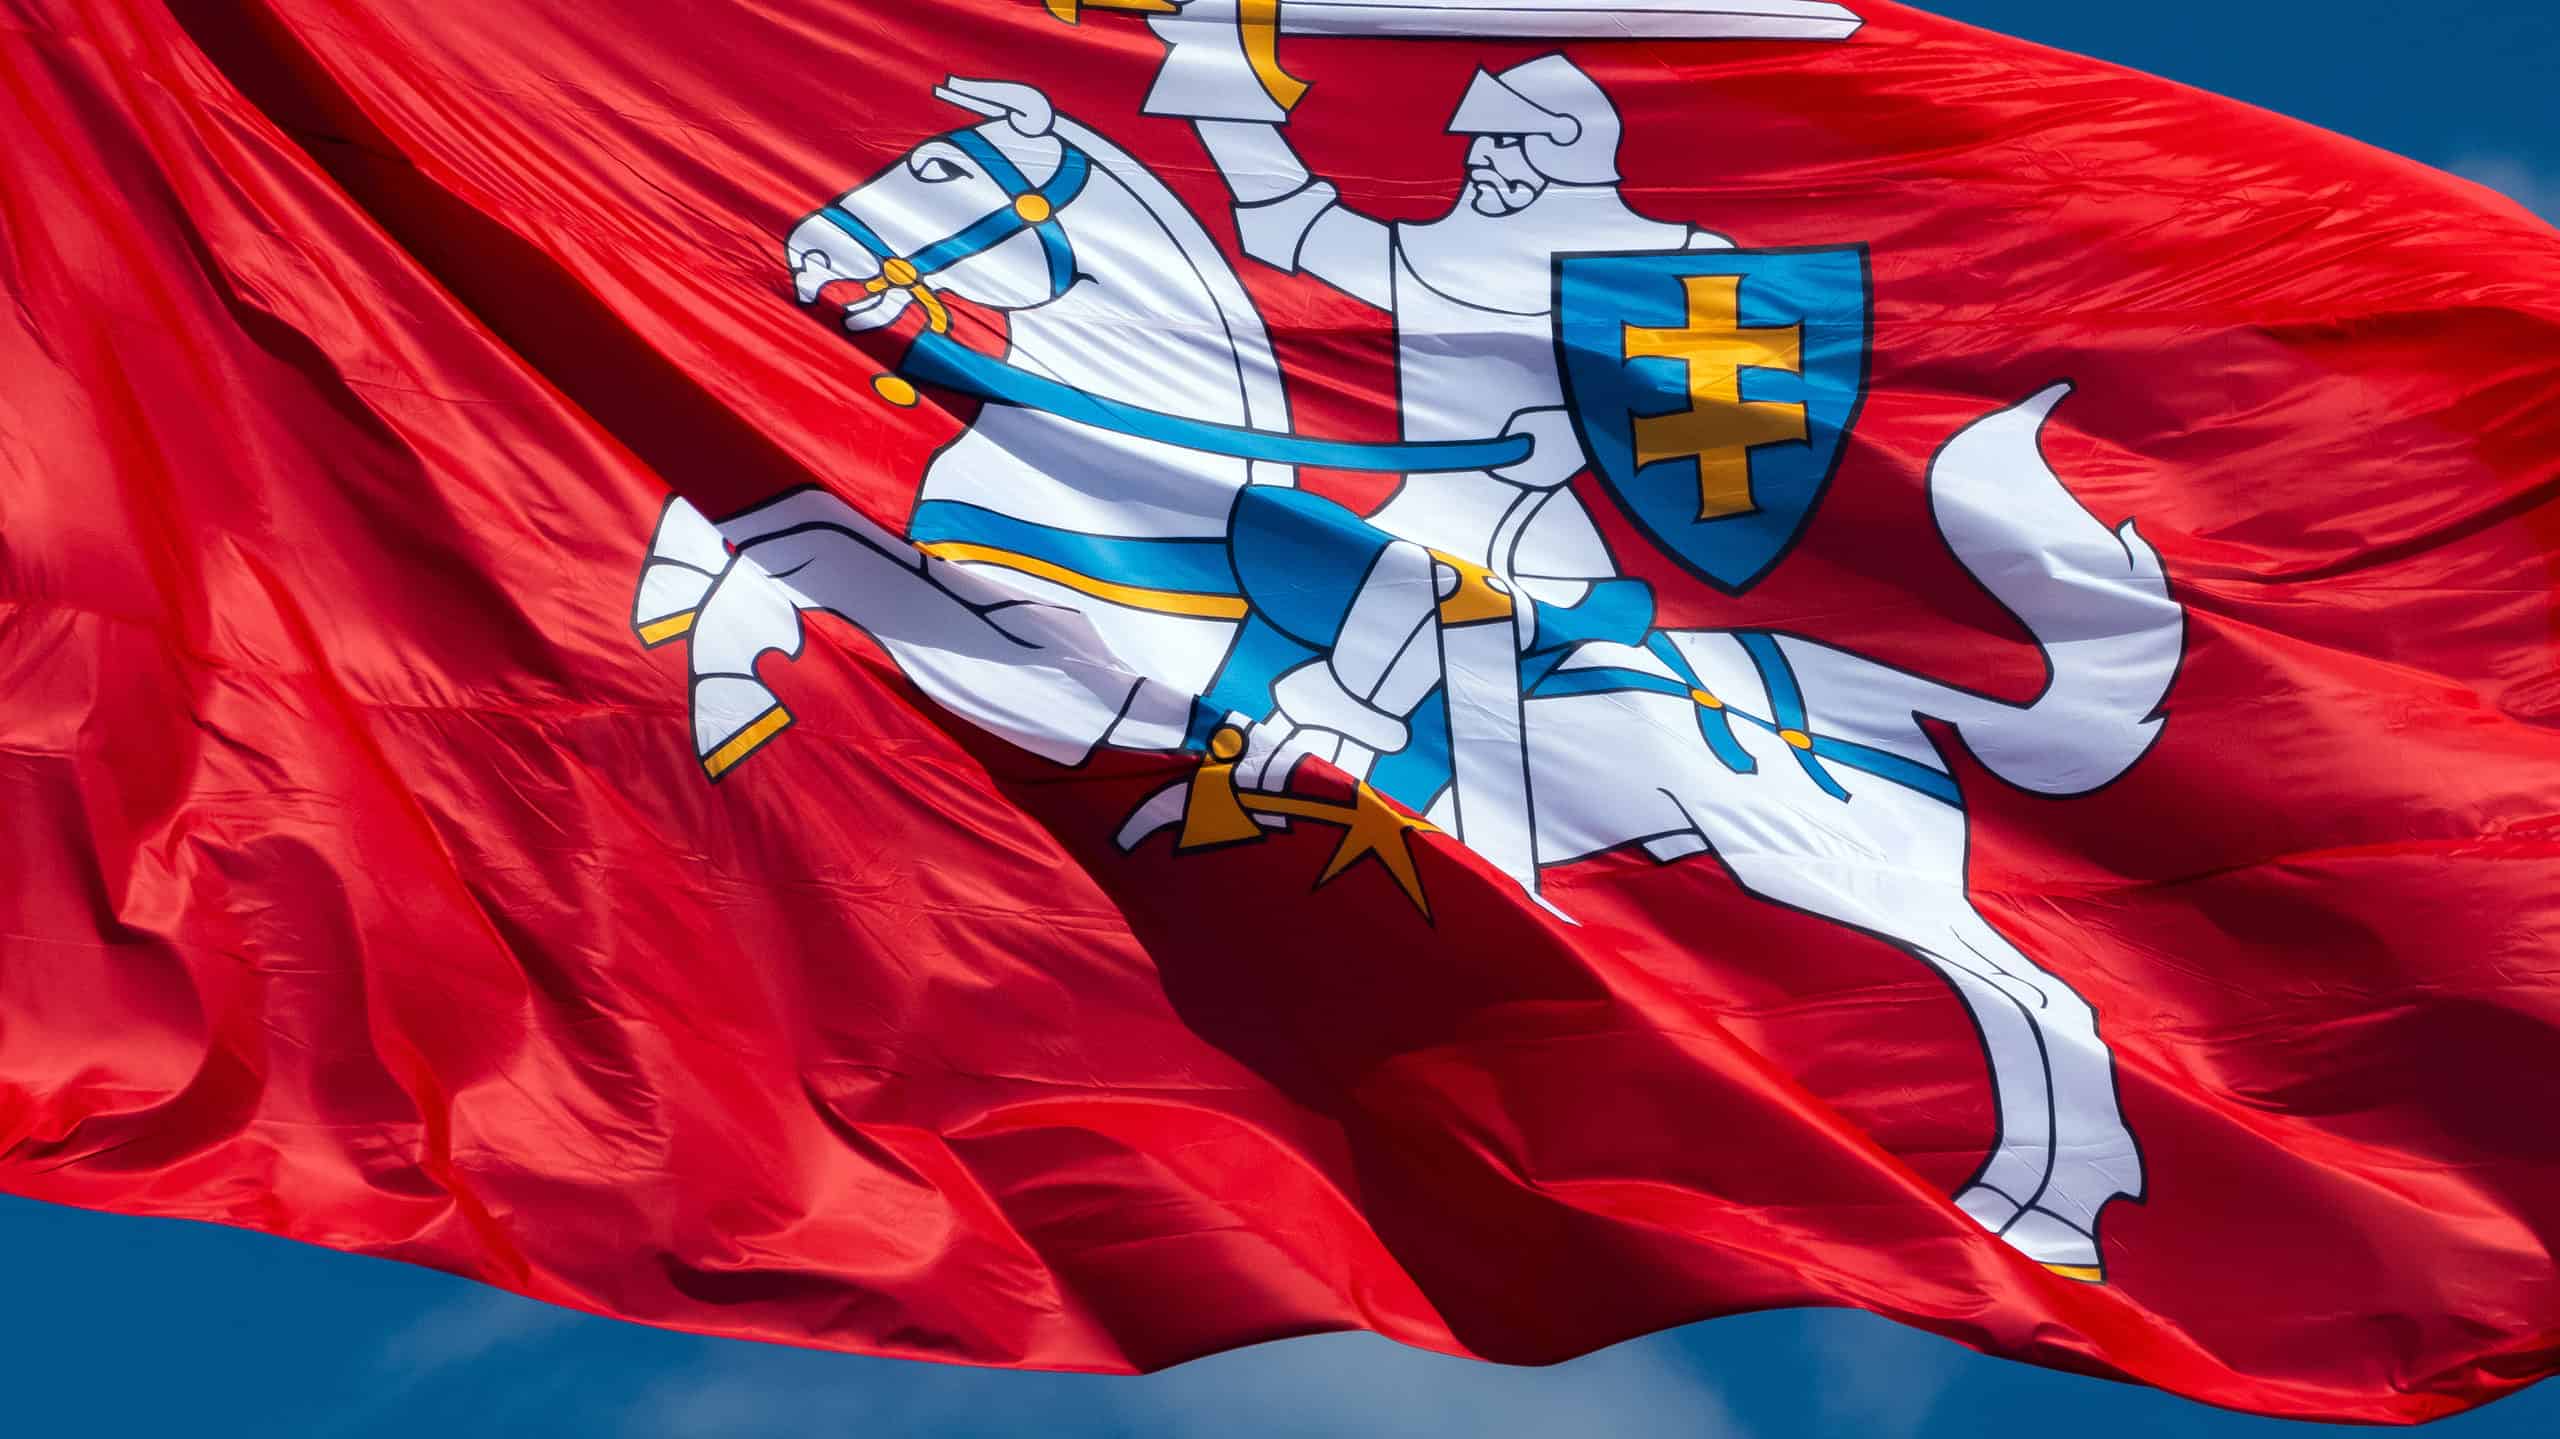 The historical flag of Lithuania hs been in use since the 15th century.